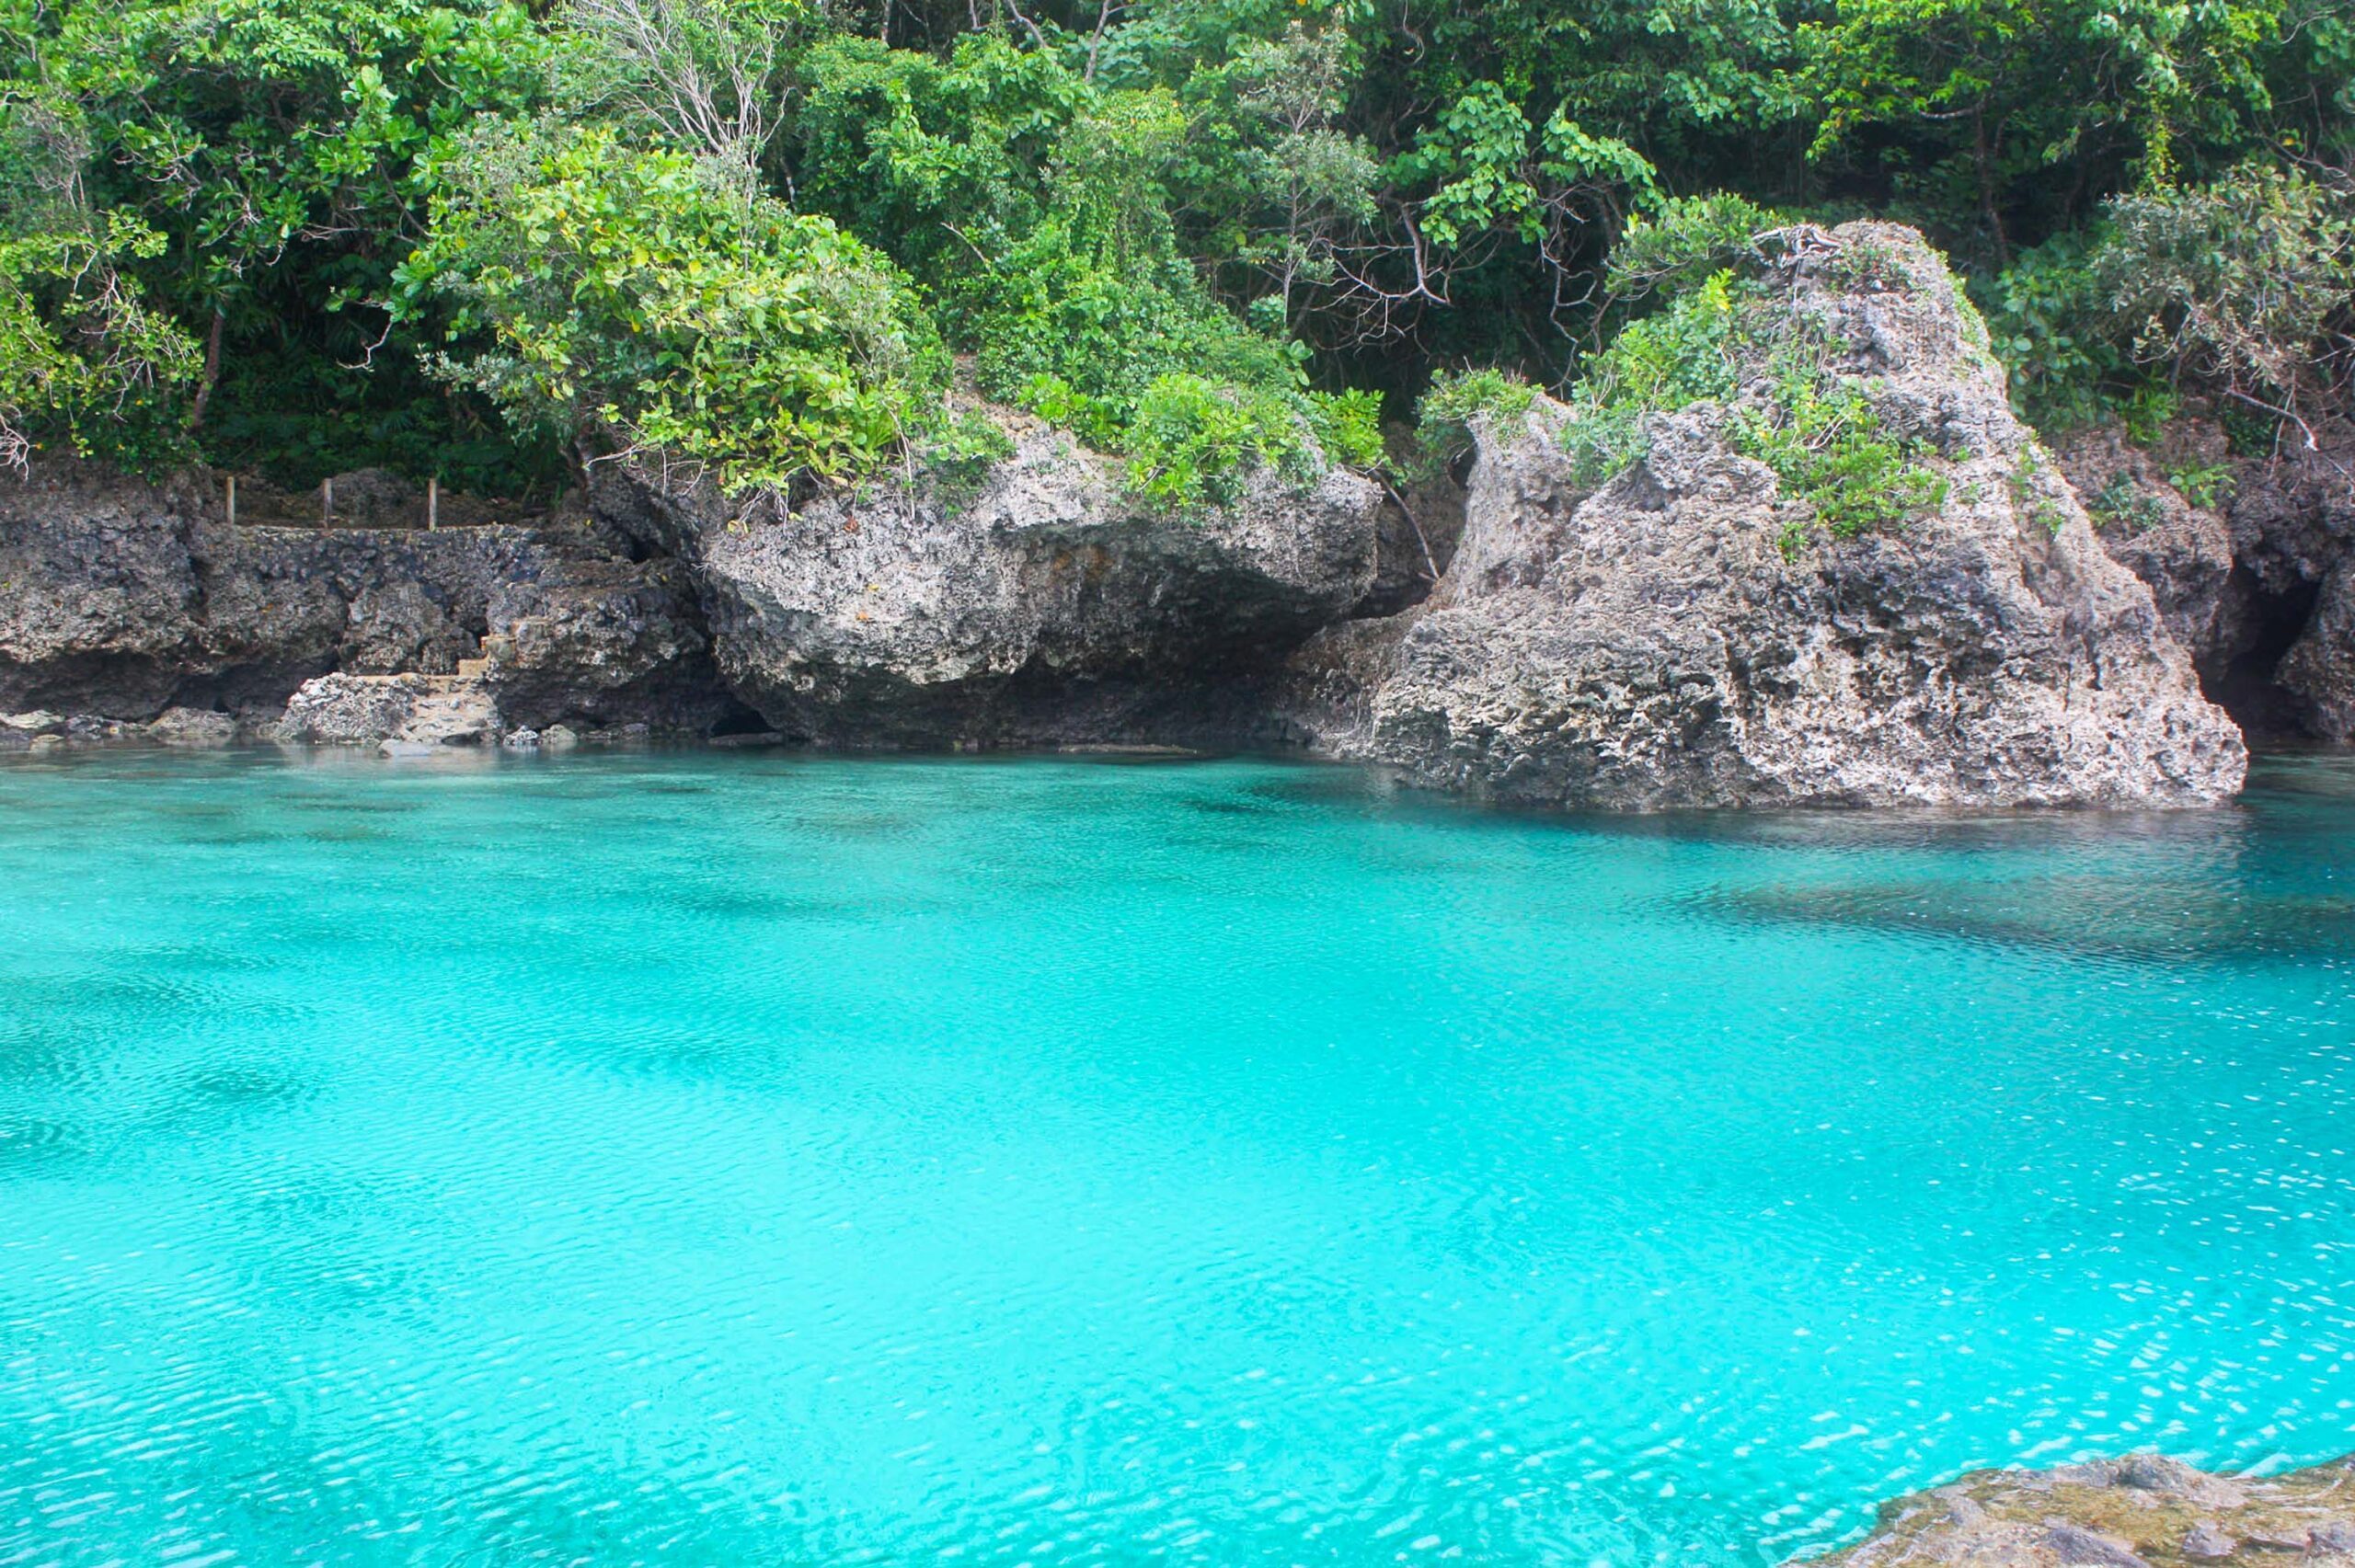 Breathtaking Siargao: Awesome things to see and do